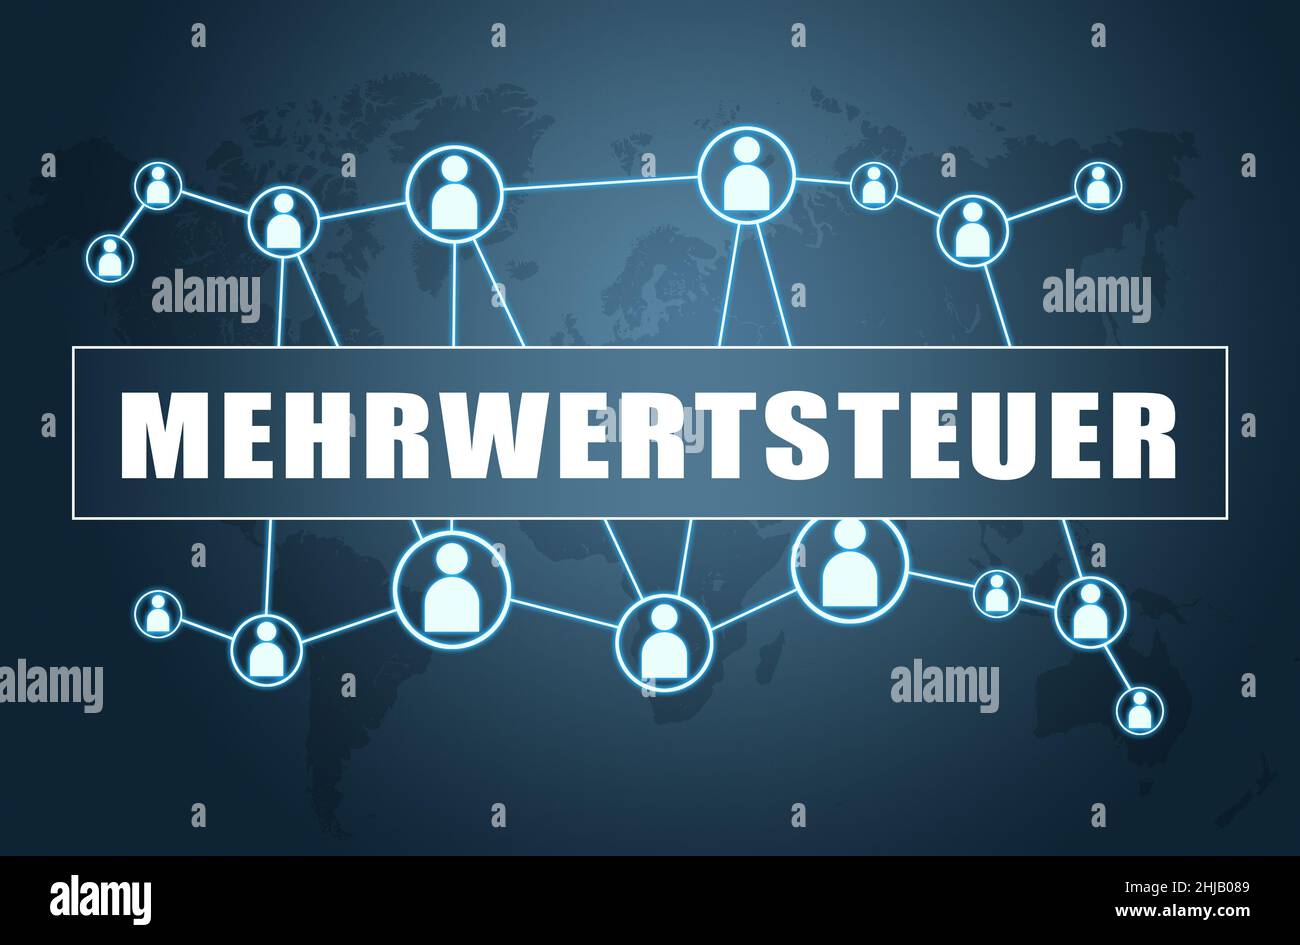 Mehrwertsteuer - german word for value added tax VAT - text concept on blue background with world map and social icons. Stock Photo